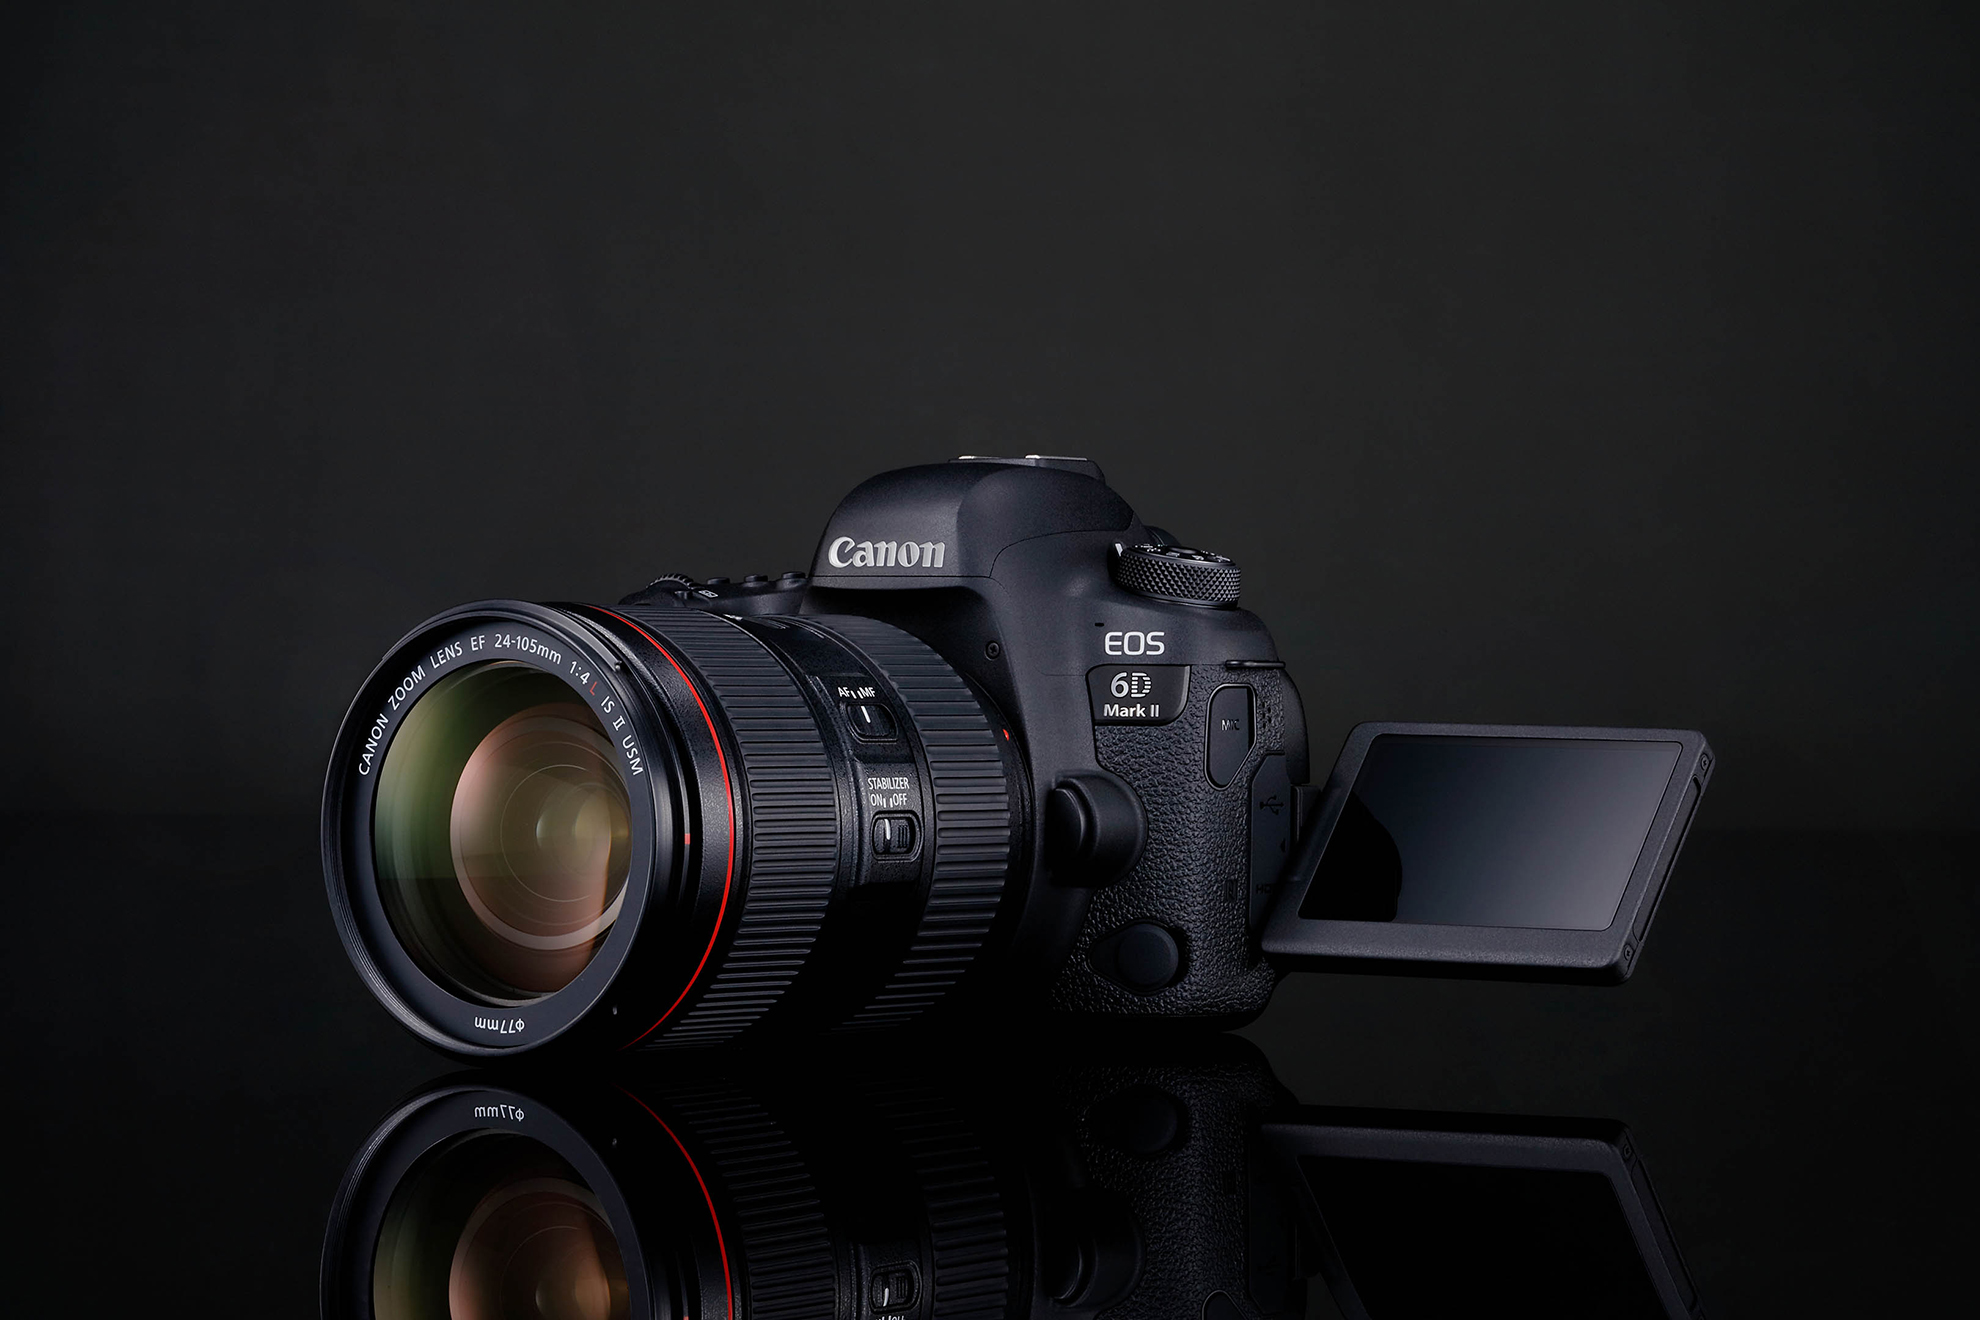 Angled view of EOS 6D Mark II